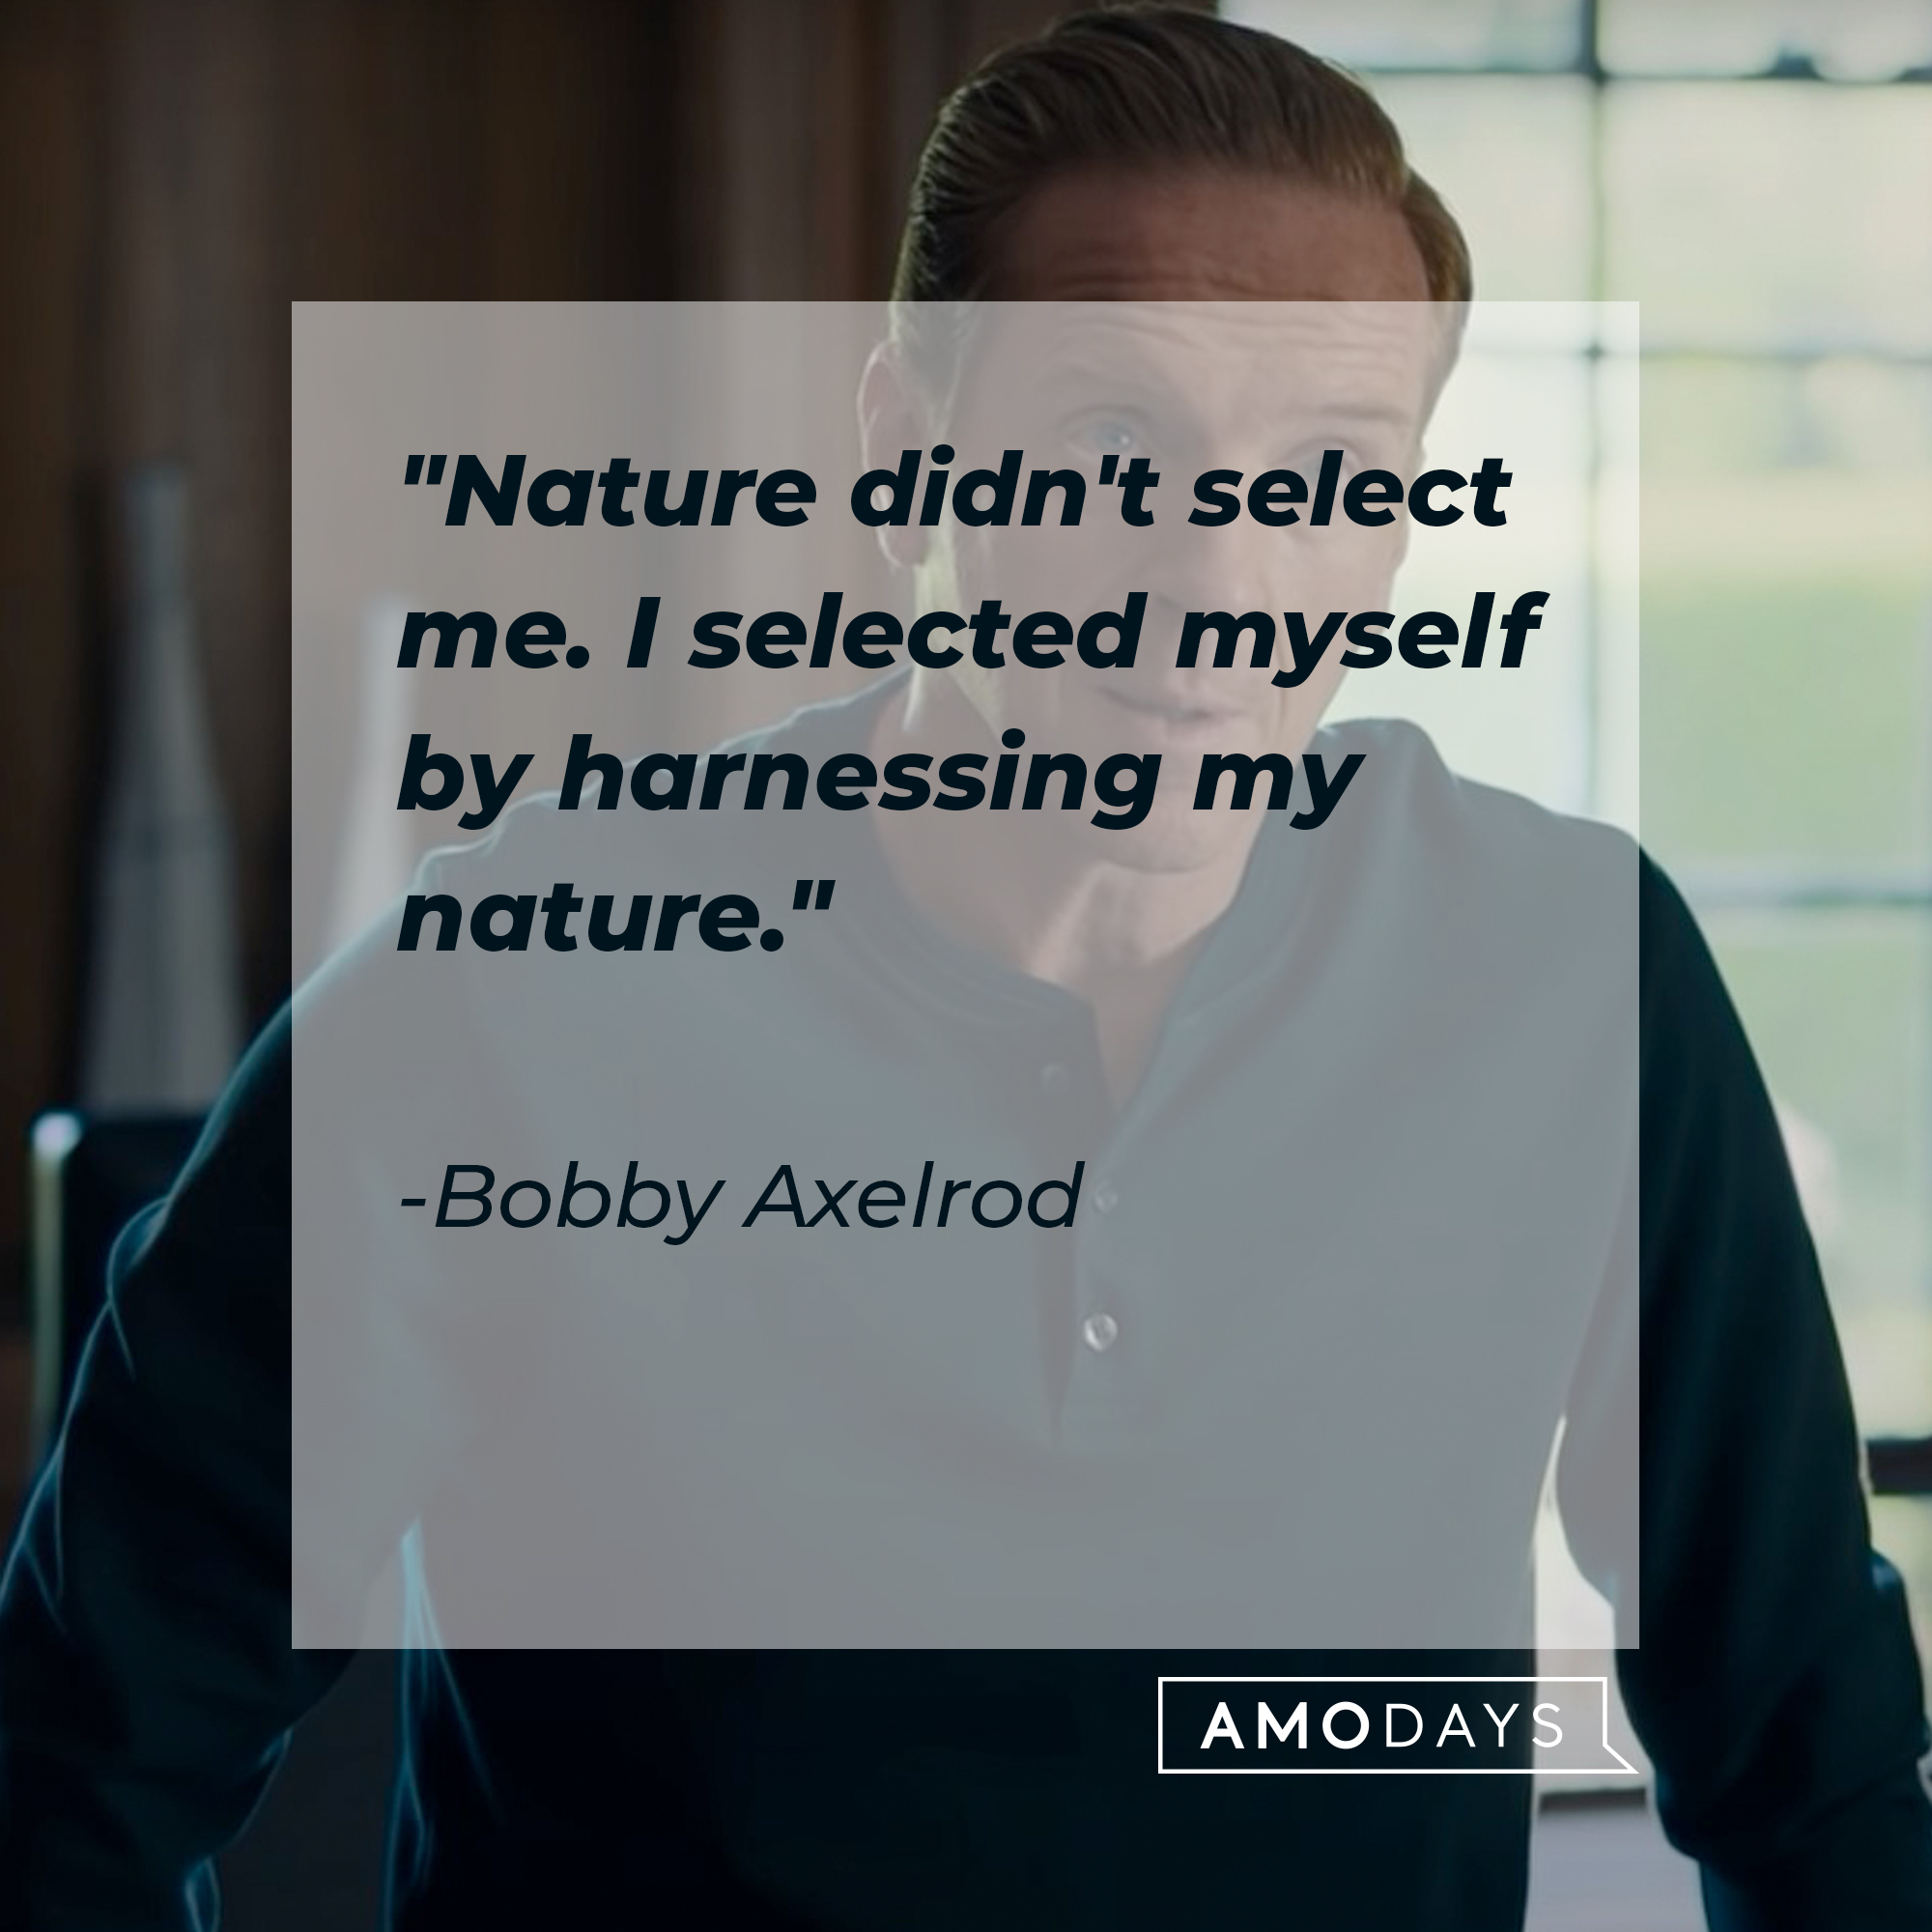 Bobby Axelrod's quote: "Nature didn't select me. I selected myself by harnessing my nature." | Source: Youtube.com/BillionsOnShowtime